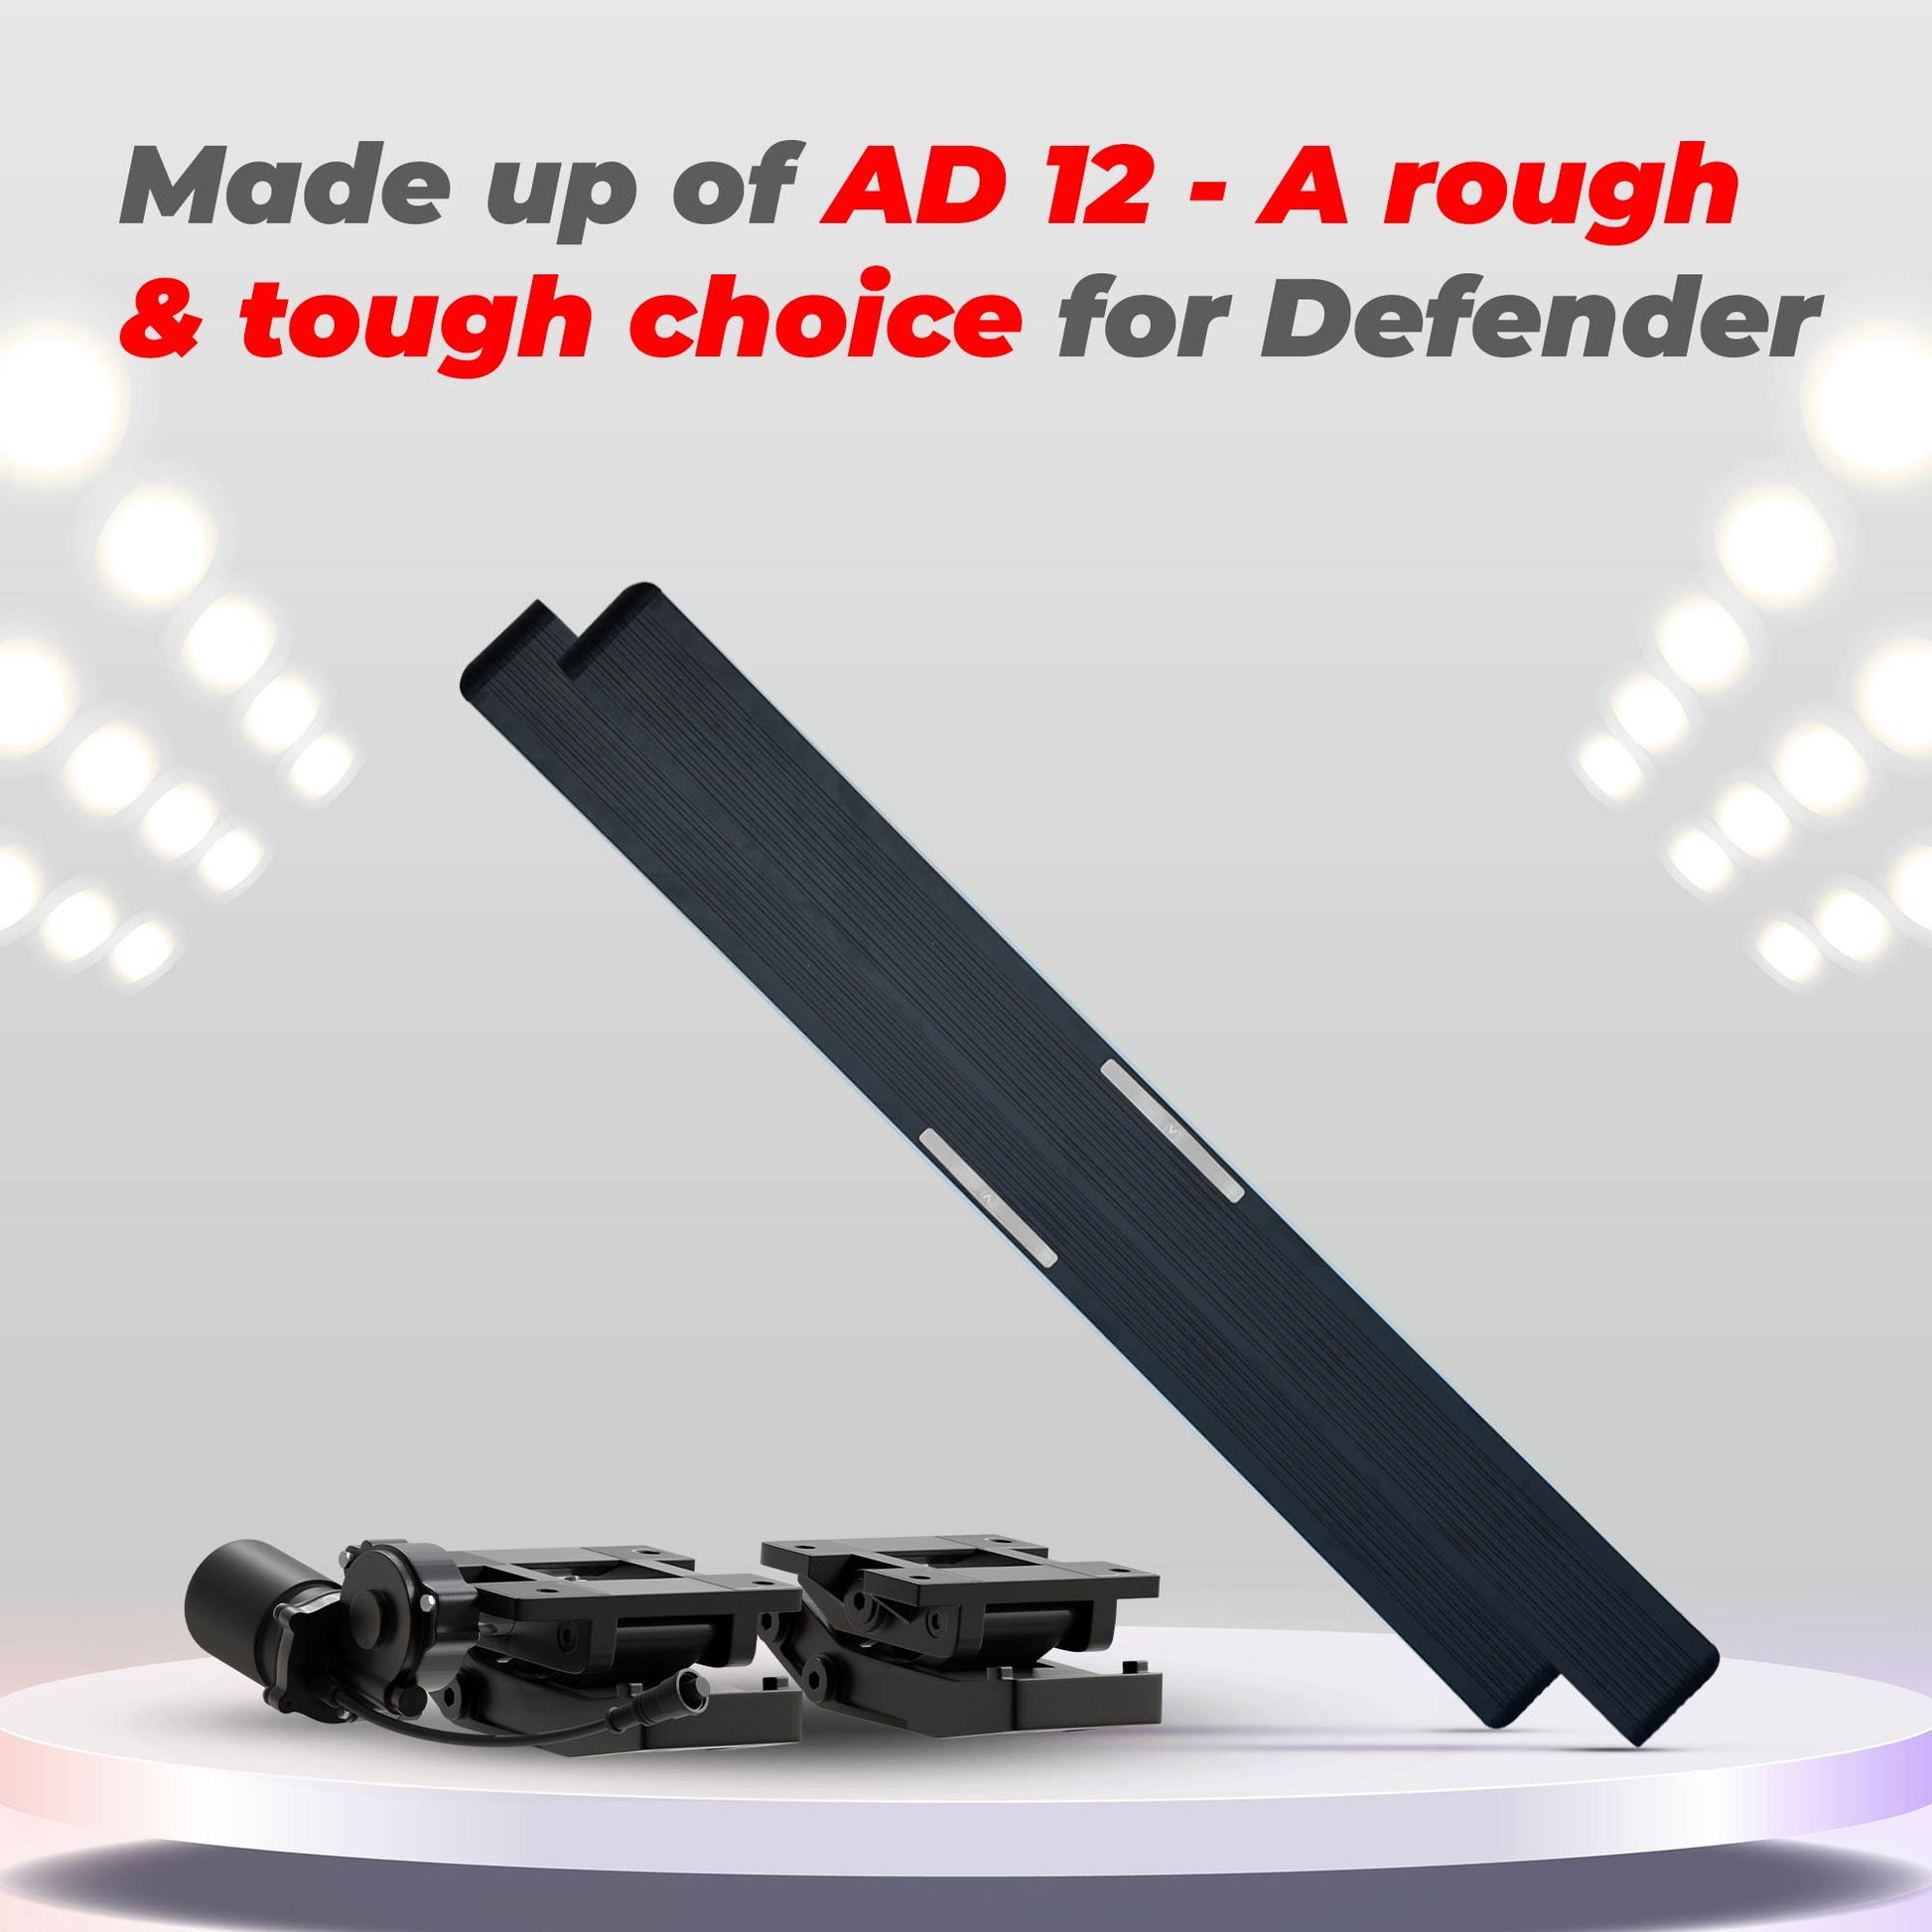 JCBL Accessories Automatic Door Side E-Step for SUVs ( Land Rover Defender 23+ E-Side Step) |Made up of AD 12 - A rough & tough choice for Defender